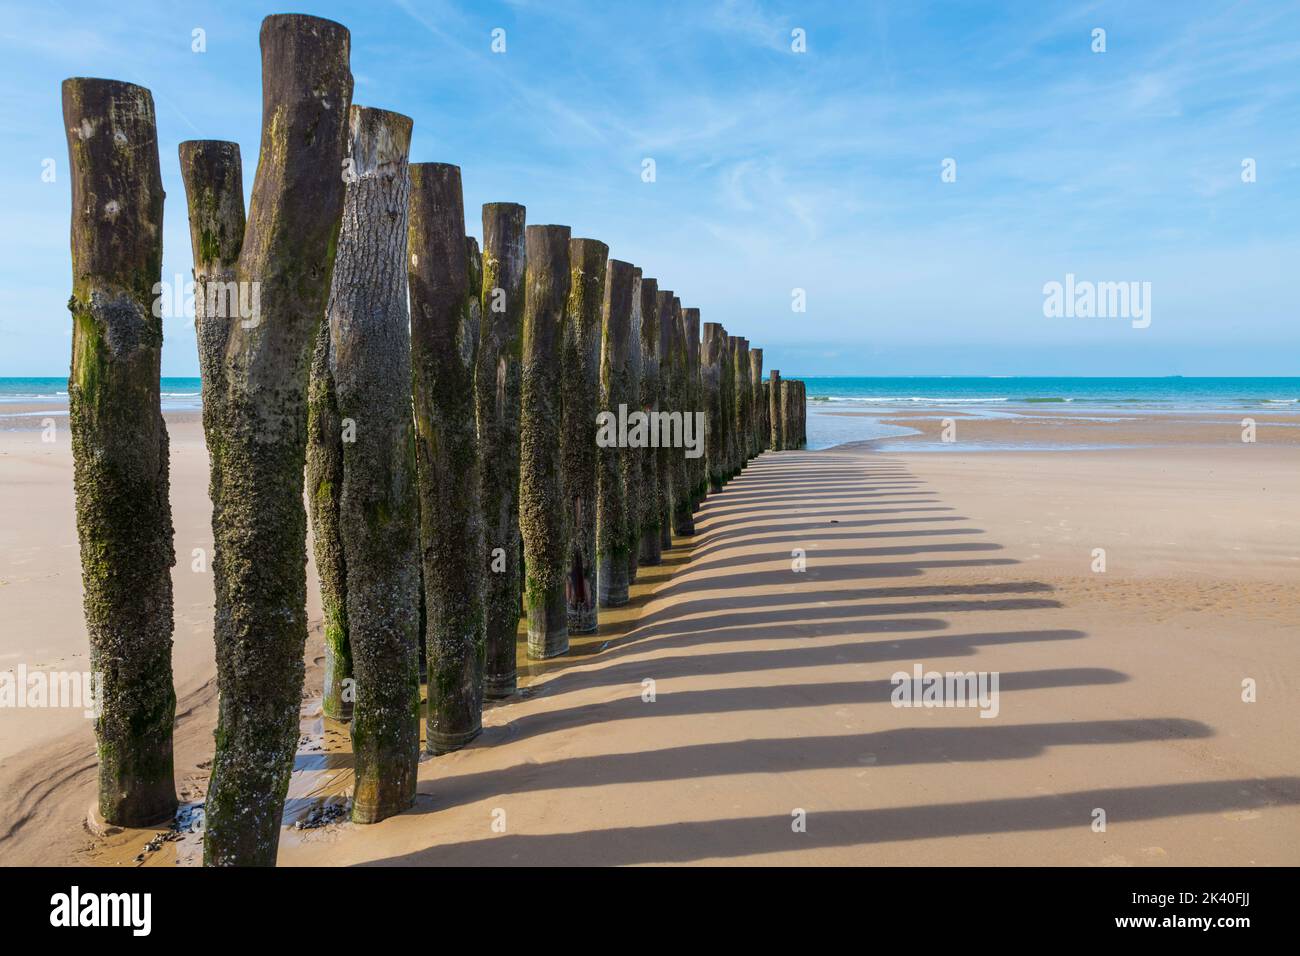 beach in france with wooden poles and the channel between france and england Stock Photo